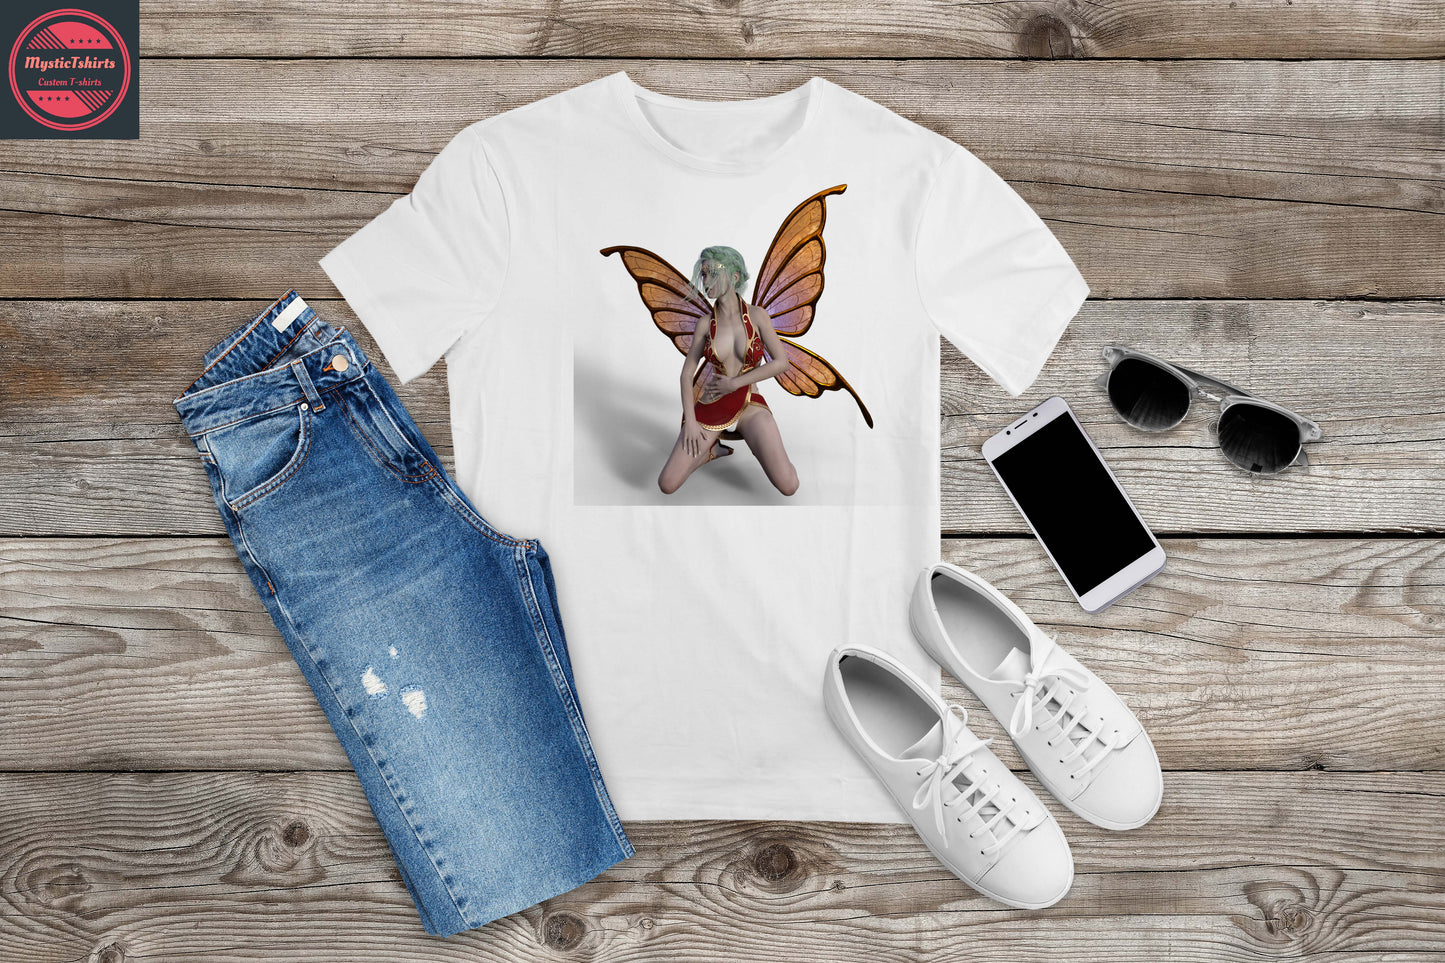 419. SEXY FAIRY, Custom Made Shirt, Personalized T-Shirt, Custom Text, Make Your Own Shirt, Custom Tee